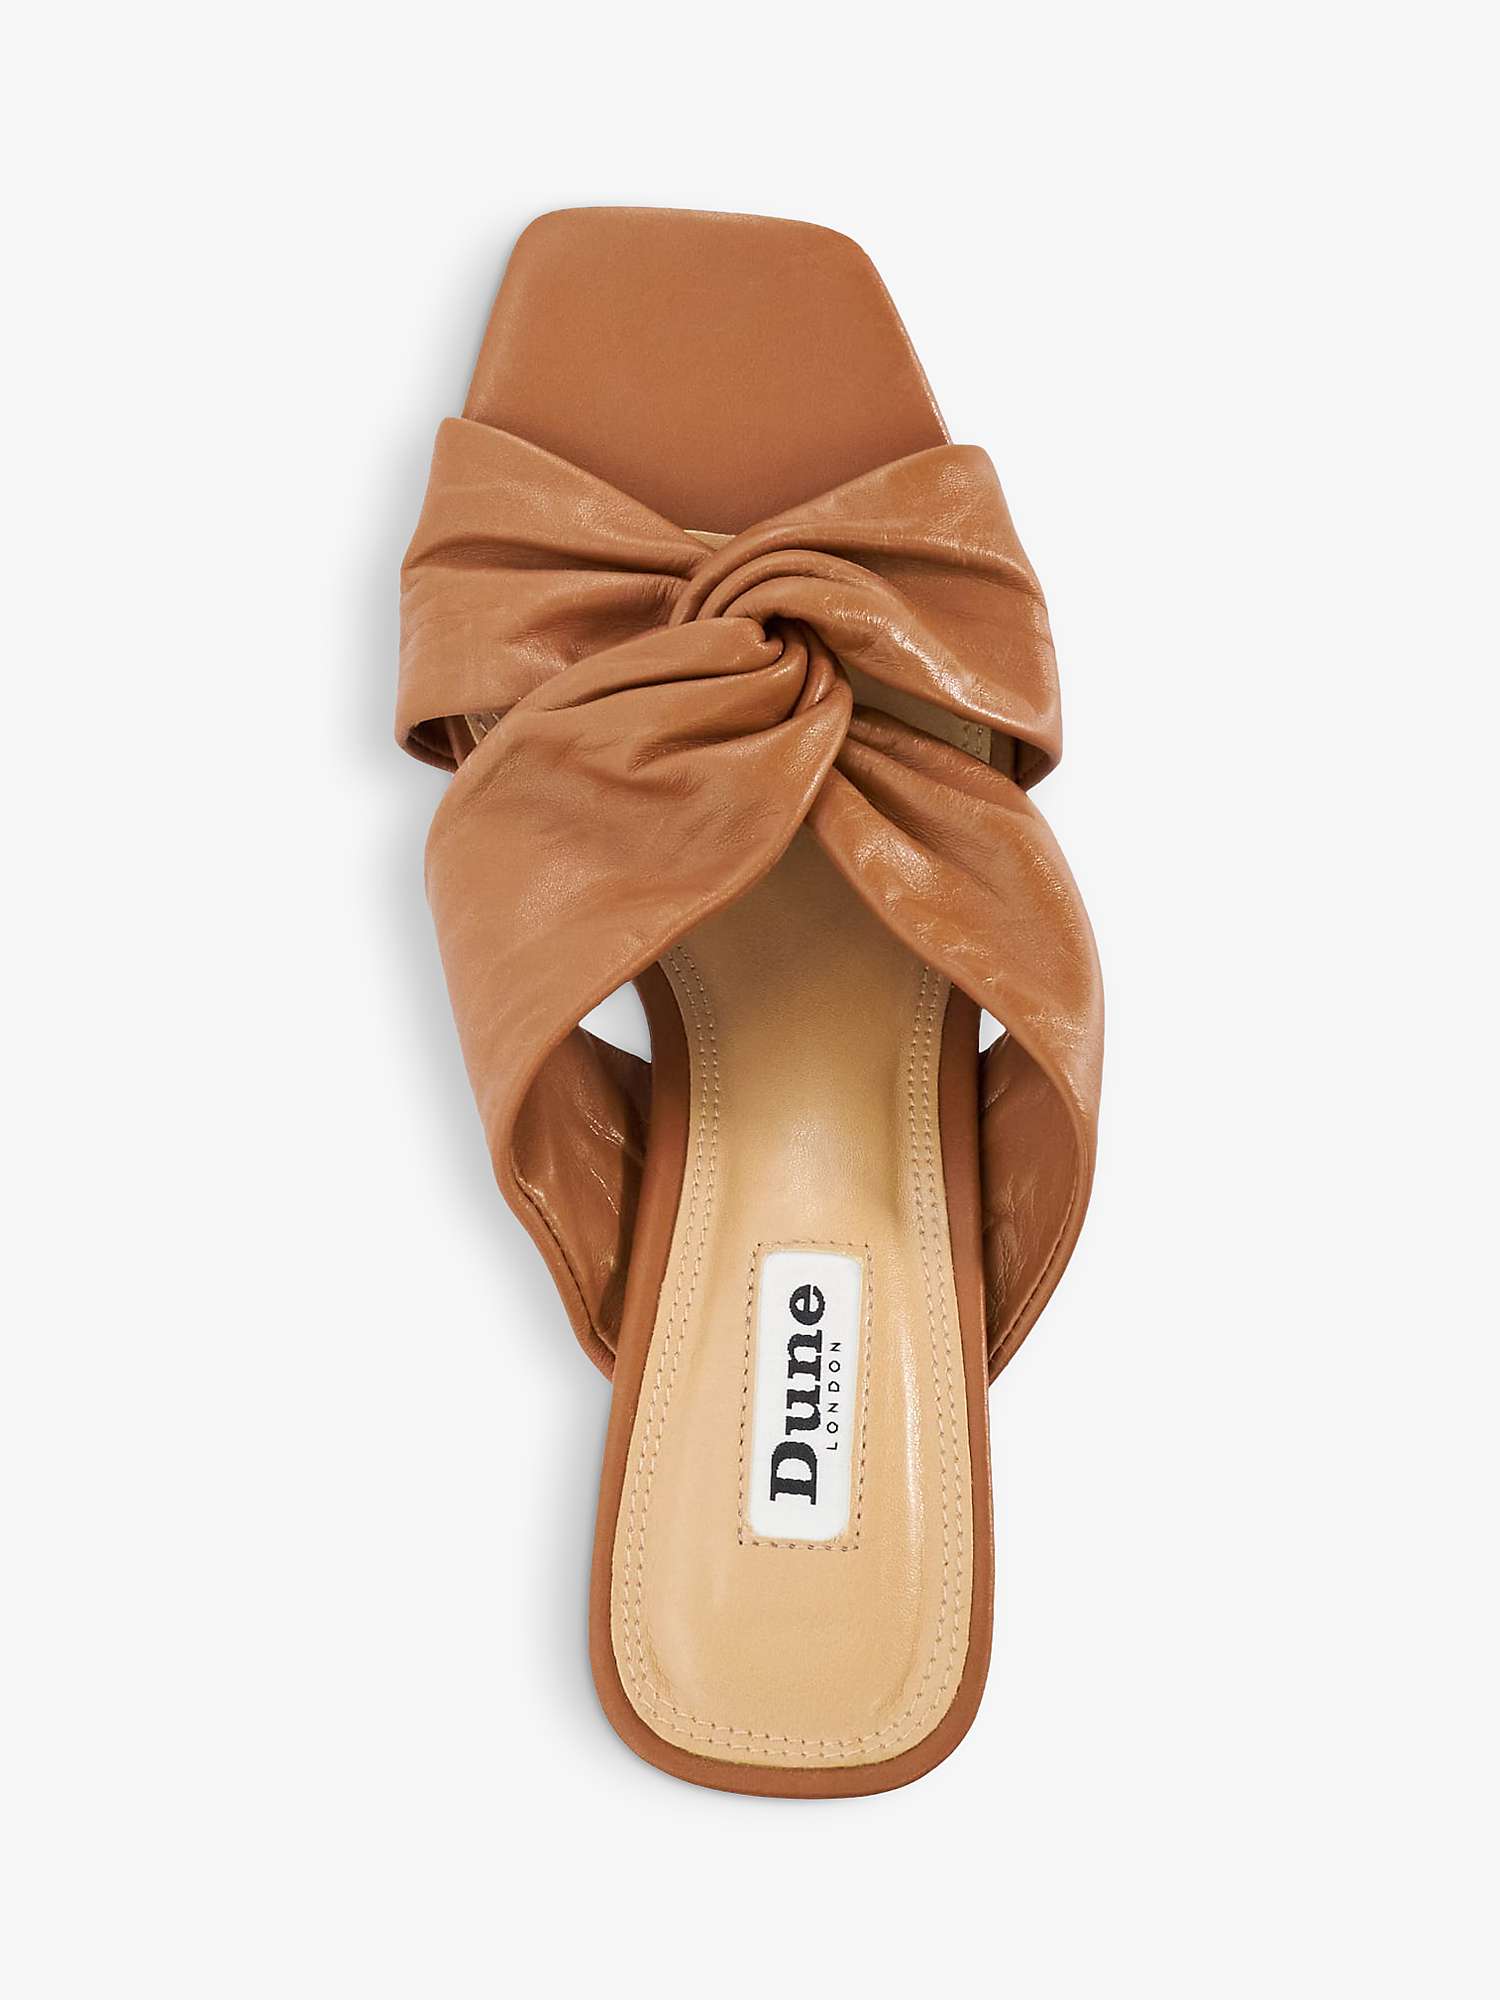 Buy Dune Maizing Soft Leather Twist Mules, Tan Online at johnlewis.com